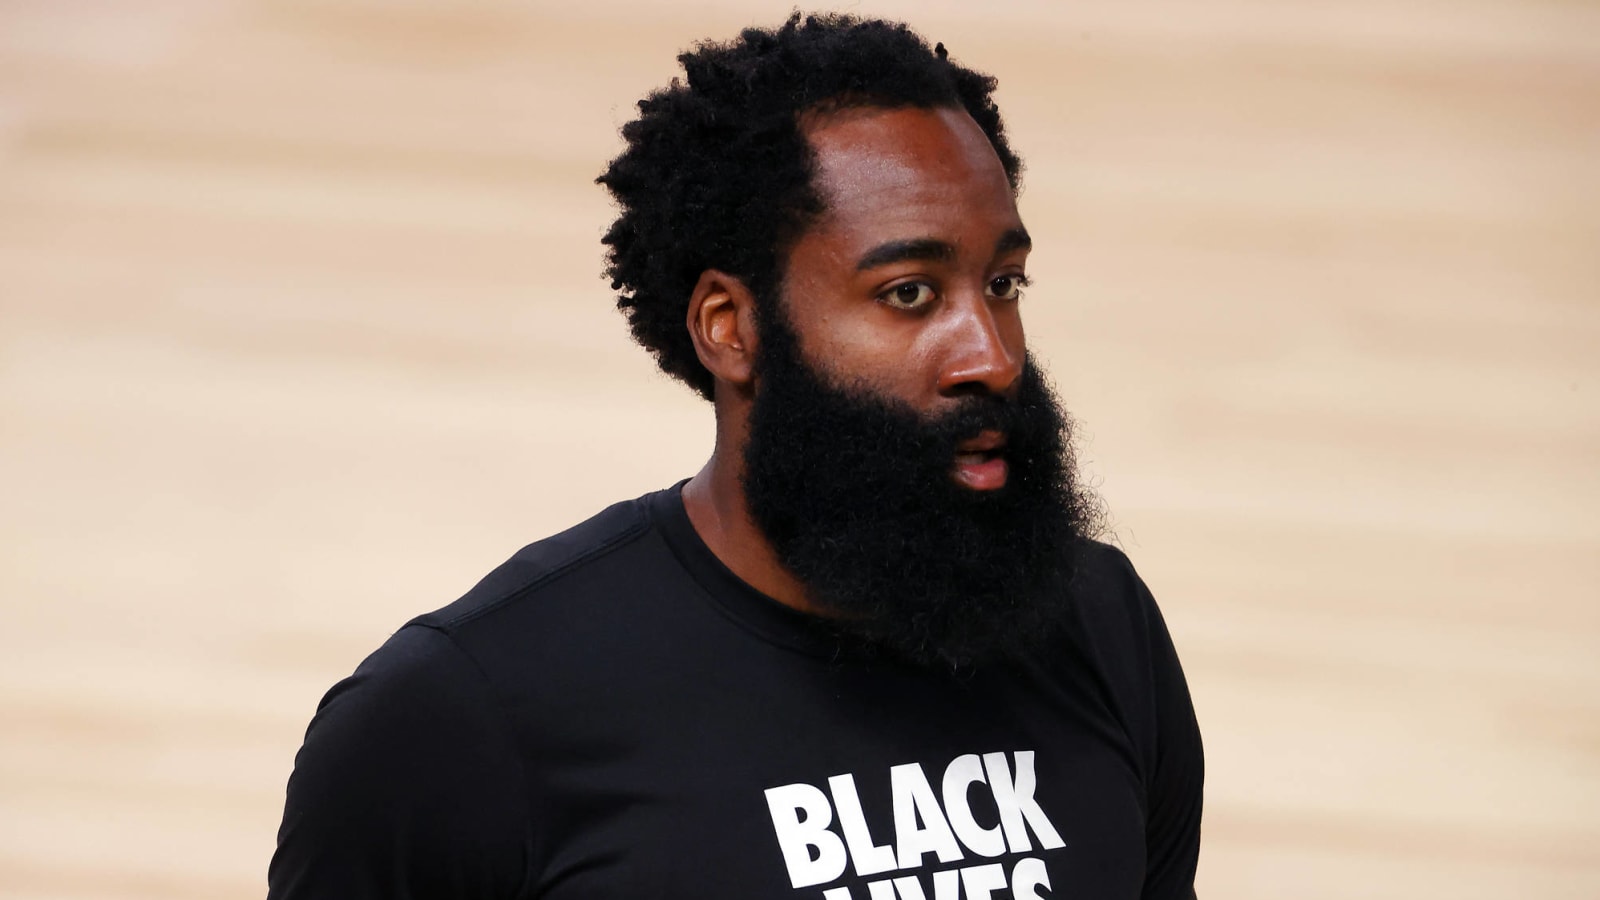 This photo of James Harden is going viral